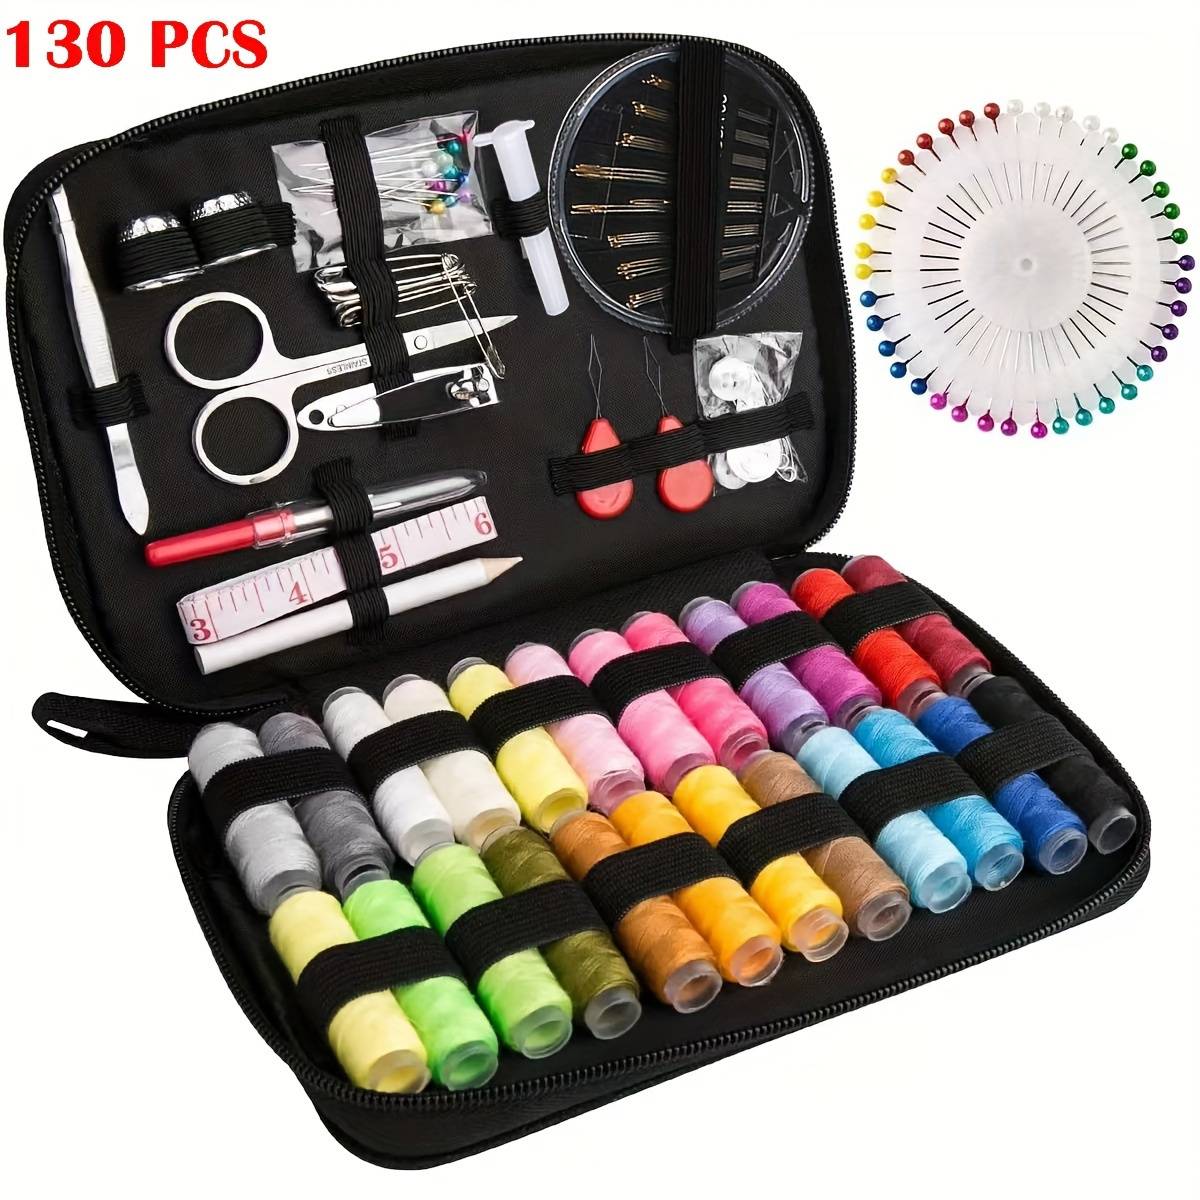 

68/98/130pcs Sewing Kit With Case Portable Sewing Supplies For Home Traveler, Adults, Beginner, Emergency, Contains Thread, Scissors, Needles, Measure Etc